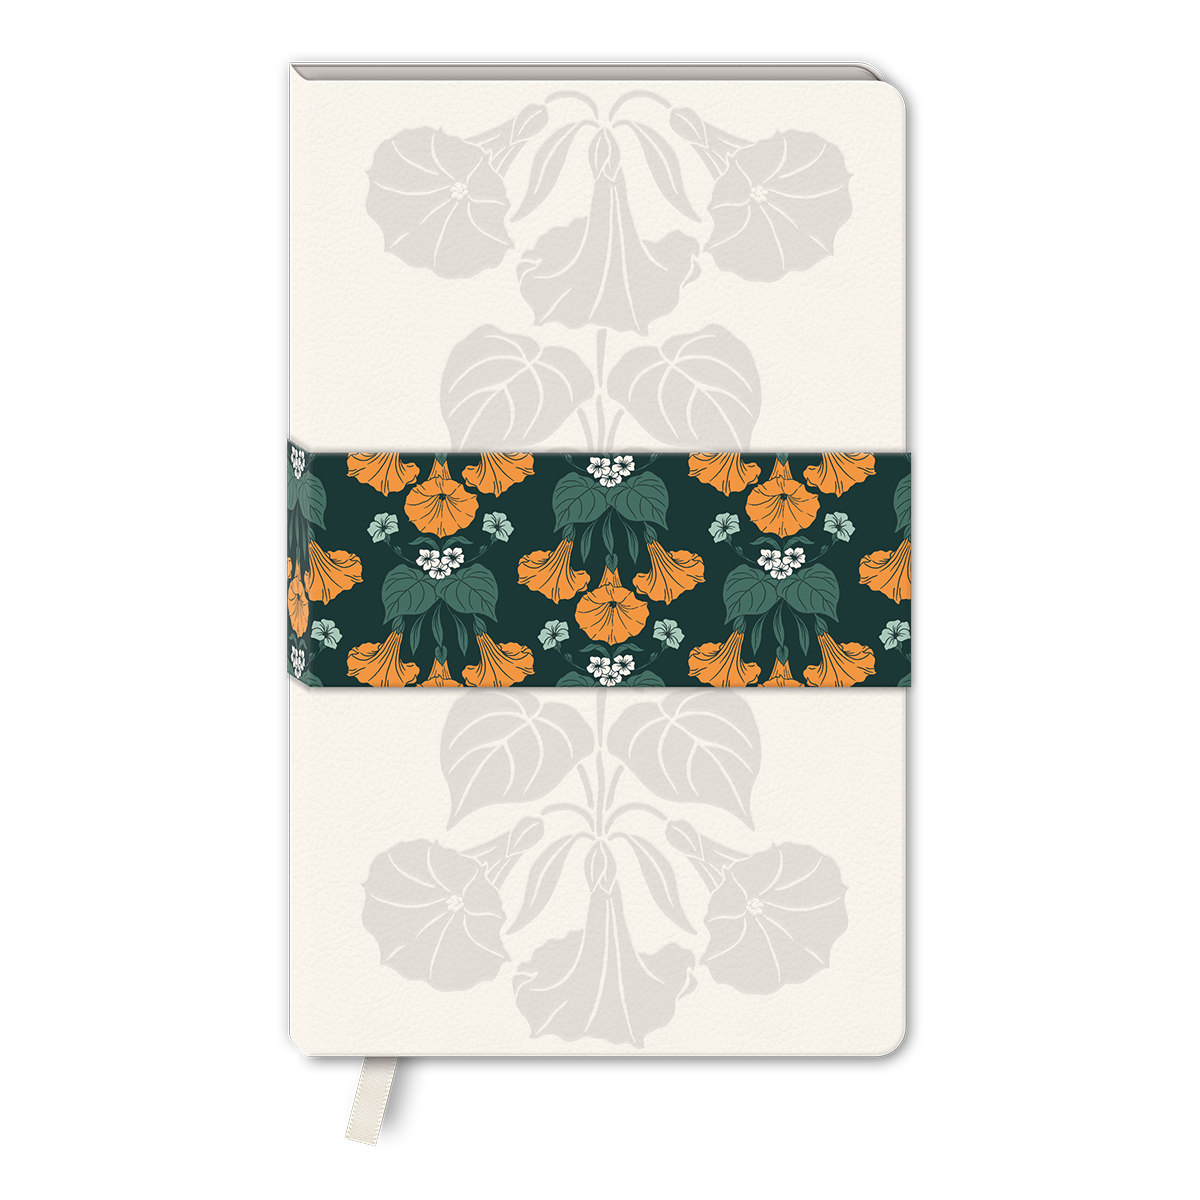 Nightshade Floral Softcover Journal Product